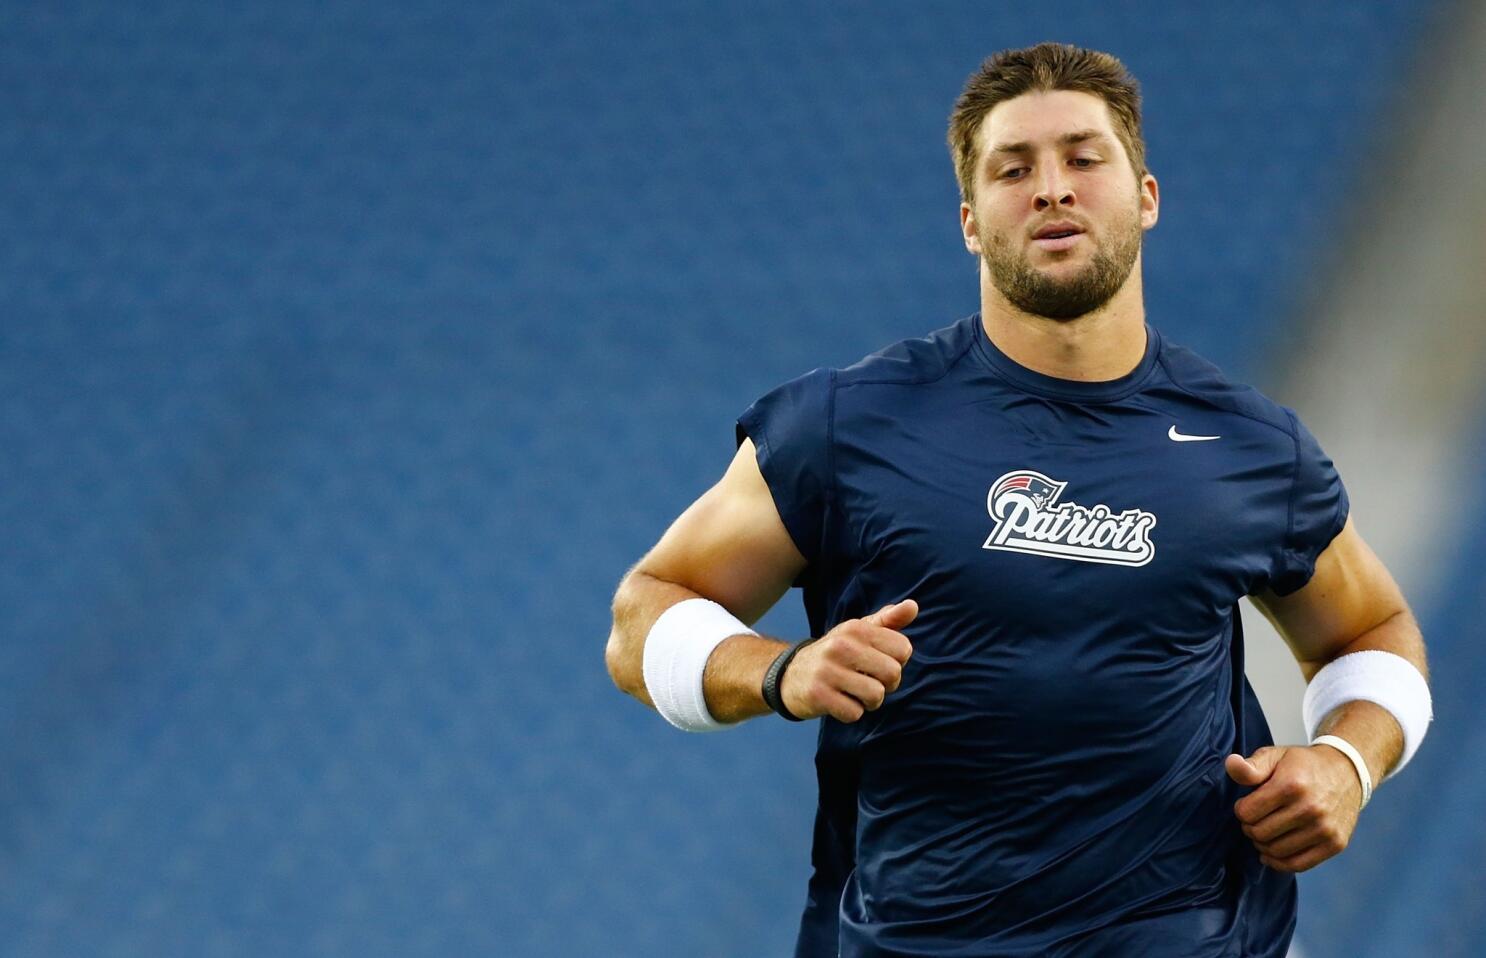 Patriots Stop Tim Tebow: Why He Will Be Missed